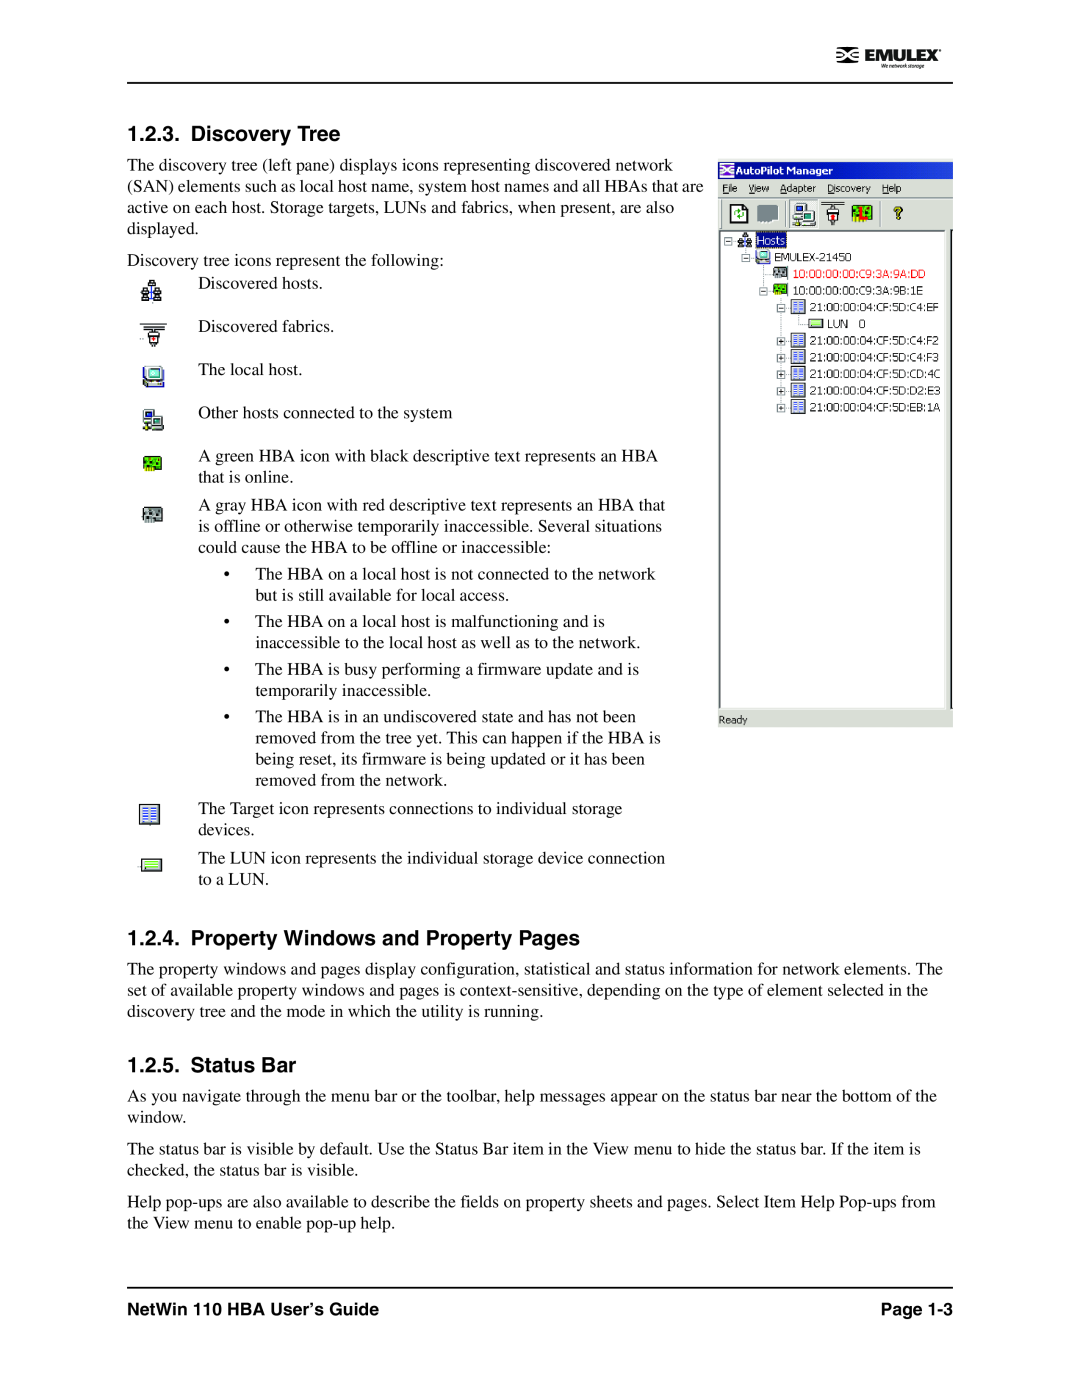 Emulex manual Discovery Tree, Property Windows and Property Pages, Status Bar, NetWin 110 HBA User’s Guide 